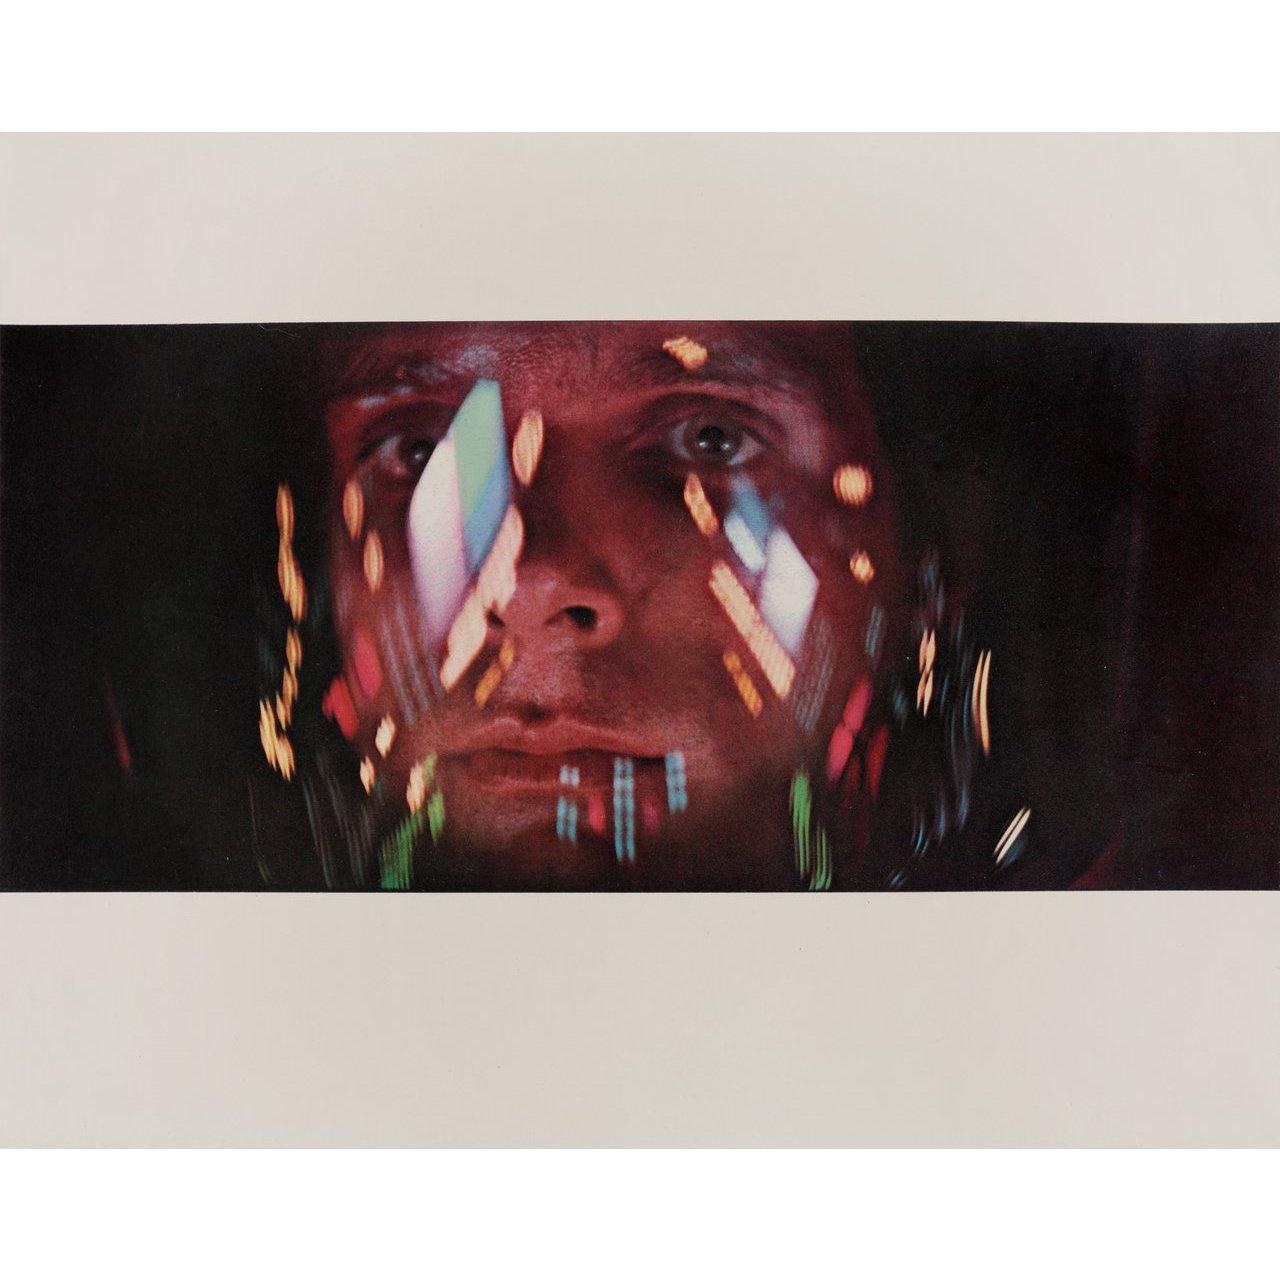 Original 1968 U.S. jumbo color photo for the film 2001: A Space Odyssey directed by Stanley Kubrick with Keir Dullea / Gary Lockwood / William Sylvester / Daniel Richter. Fine condition, linen-backed. This photo has been professionally linen-backed.